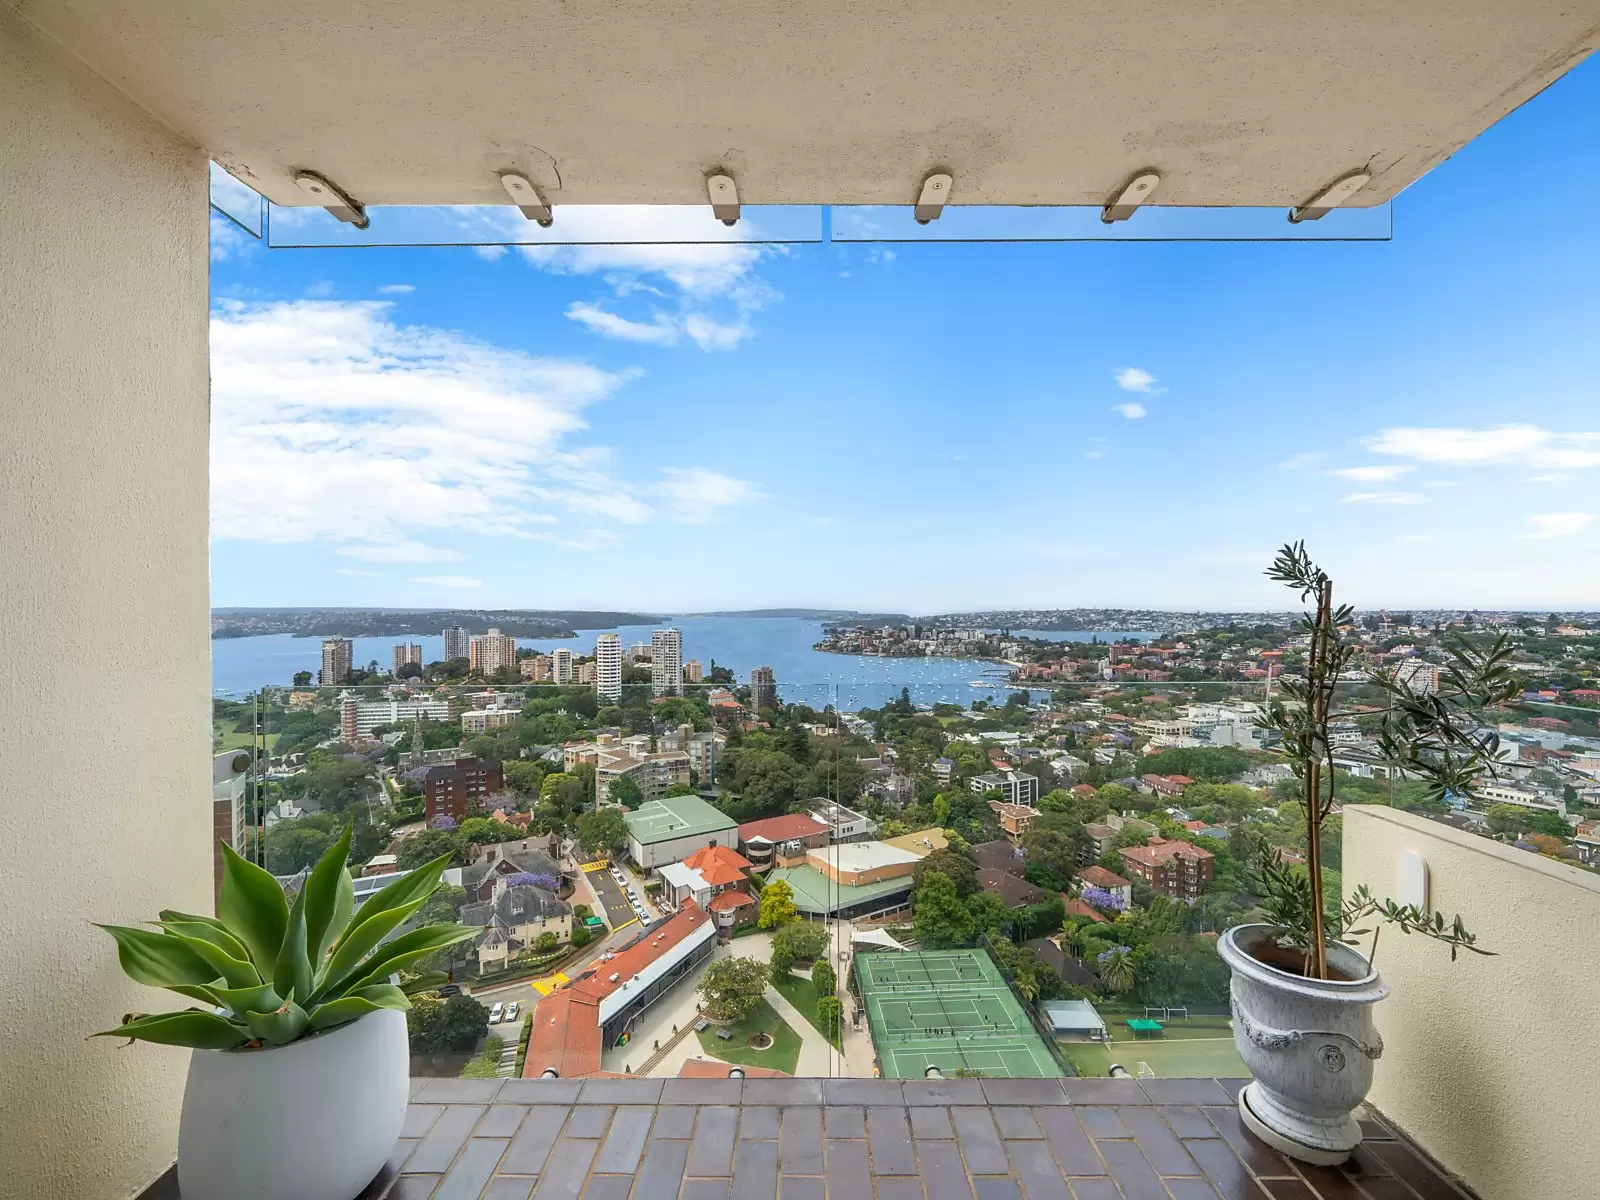 Photo #7: 29G/3 Darling Point Road, Darling Point - For Sale by Sydney Sotheby's International Realty